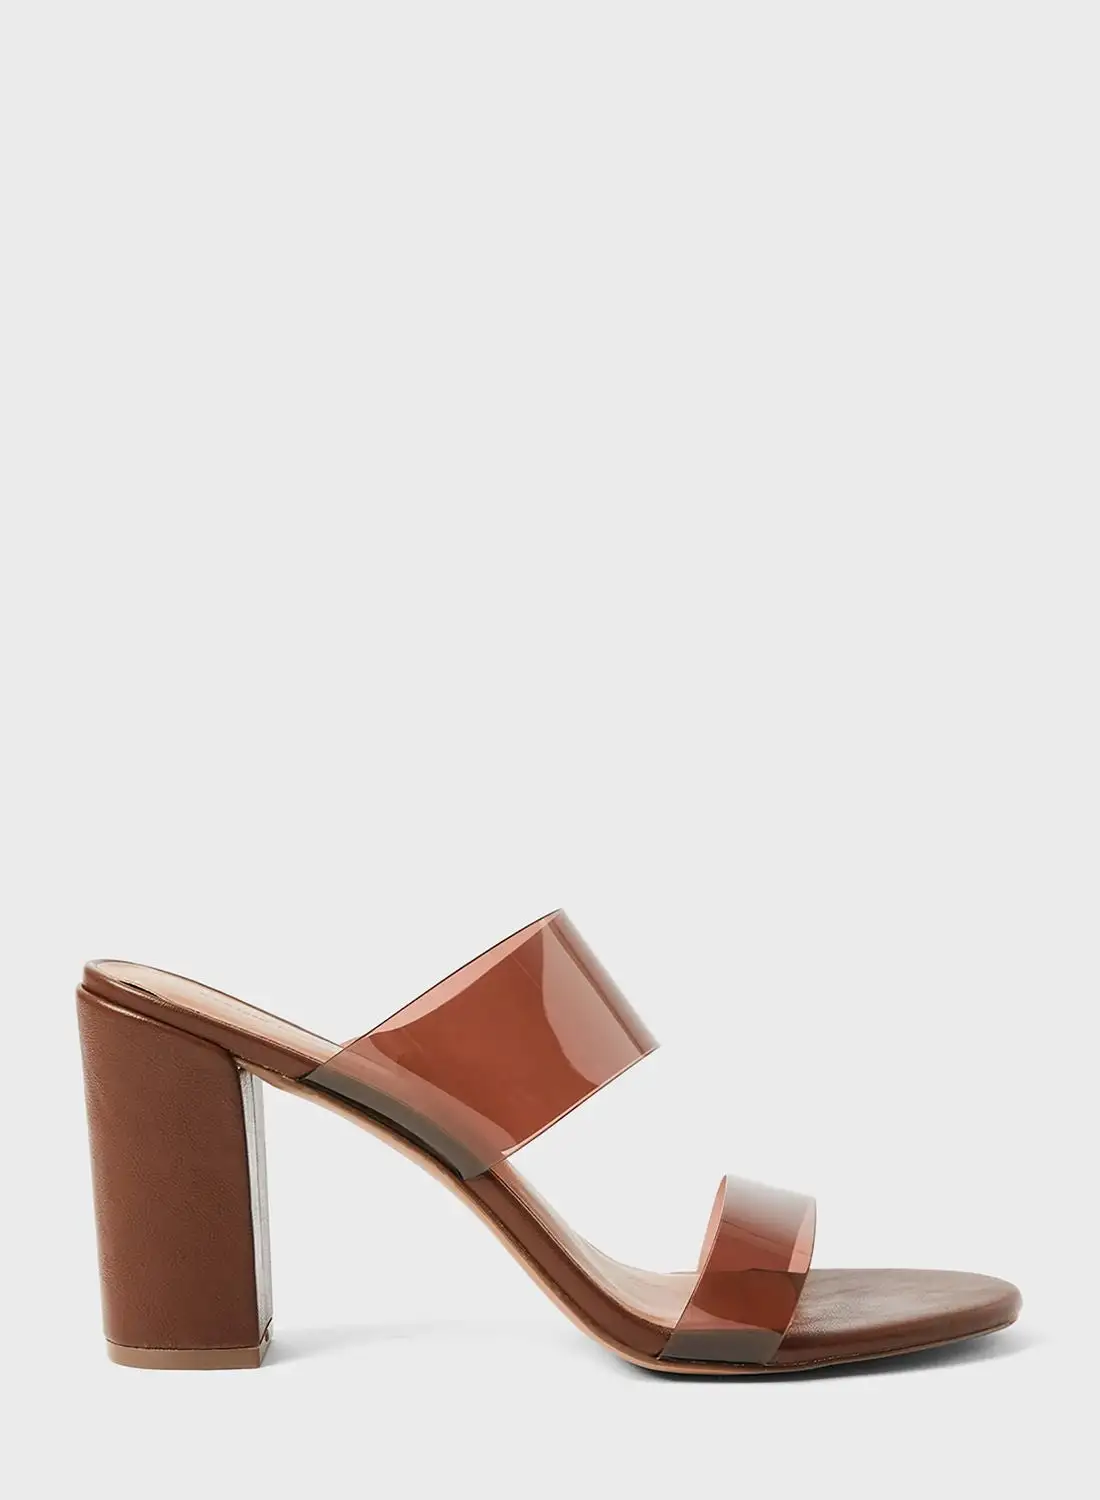 CALL IT SPRING Brynna Vegan Leather Sandals